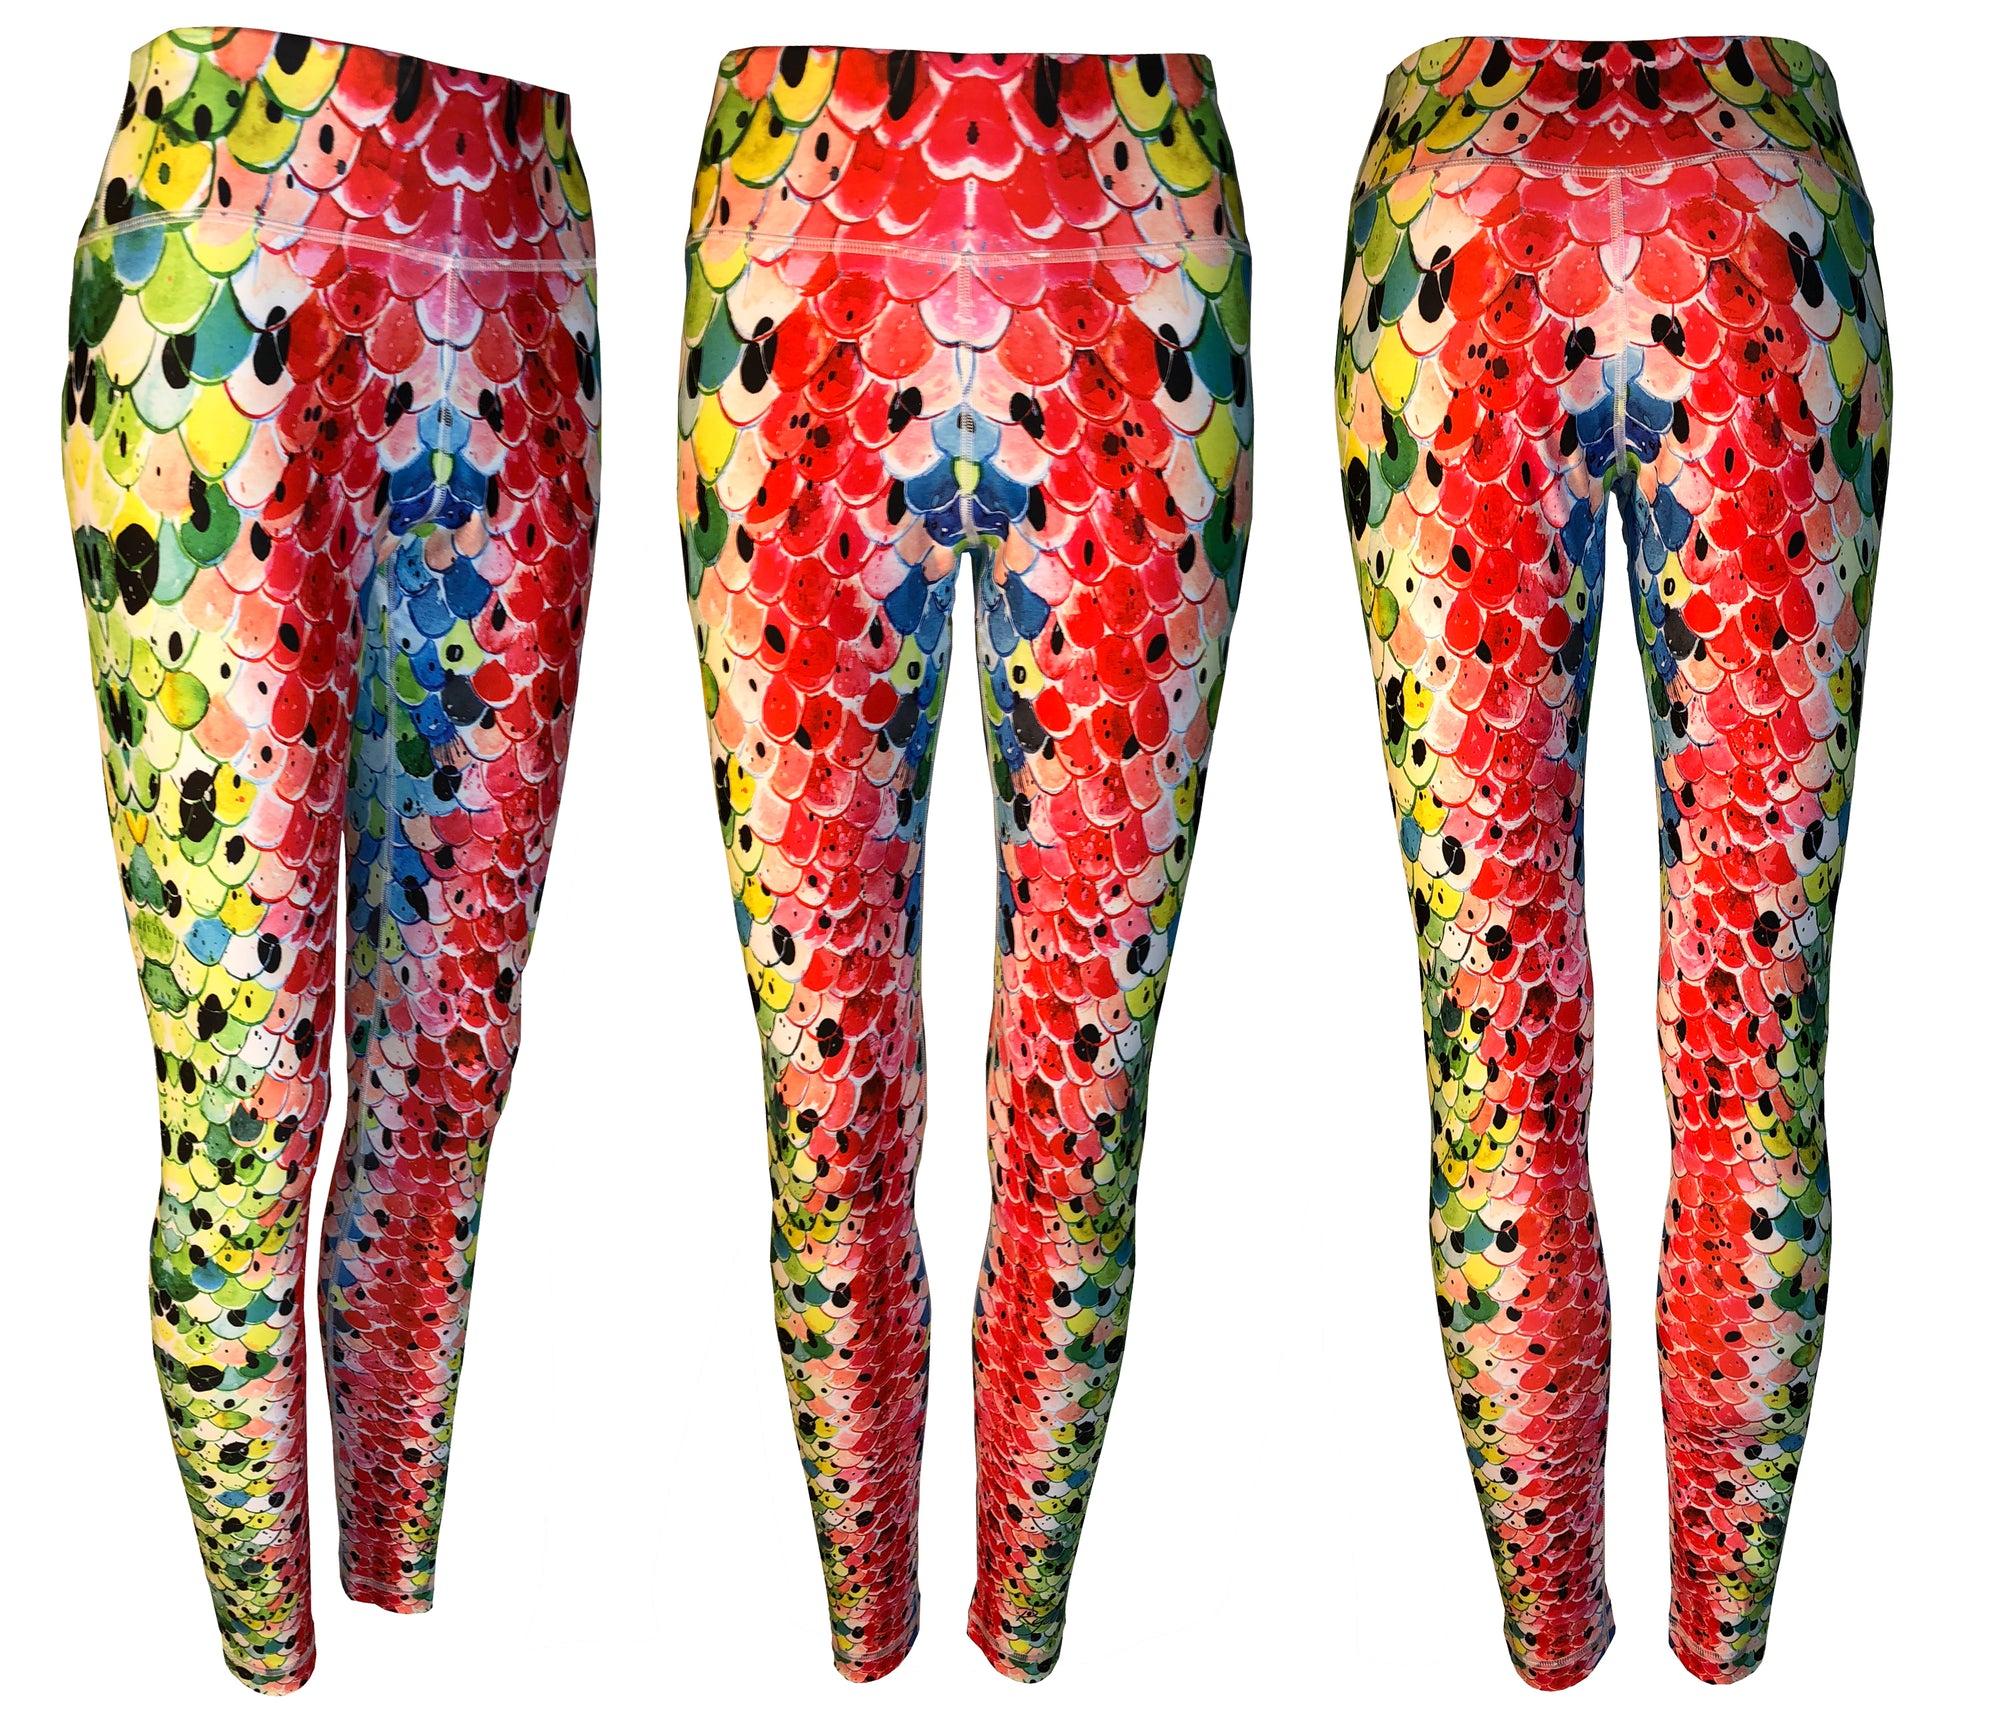 Rainbow#3 Trout All Sport Leggings  Women's Fly Fishing Clothing - Cognito  Brands, Inc.